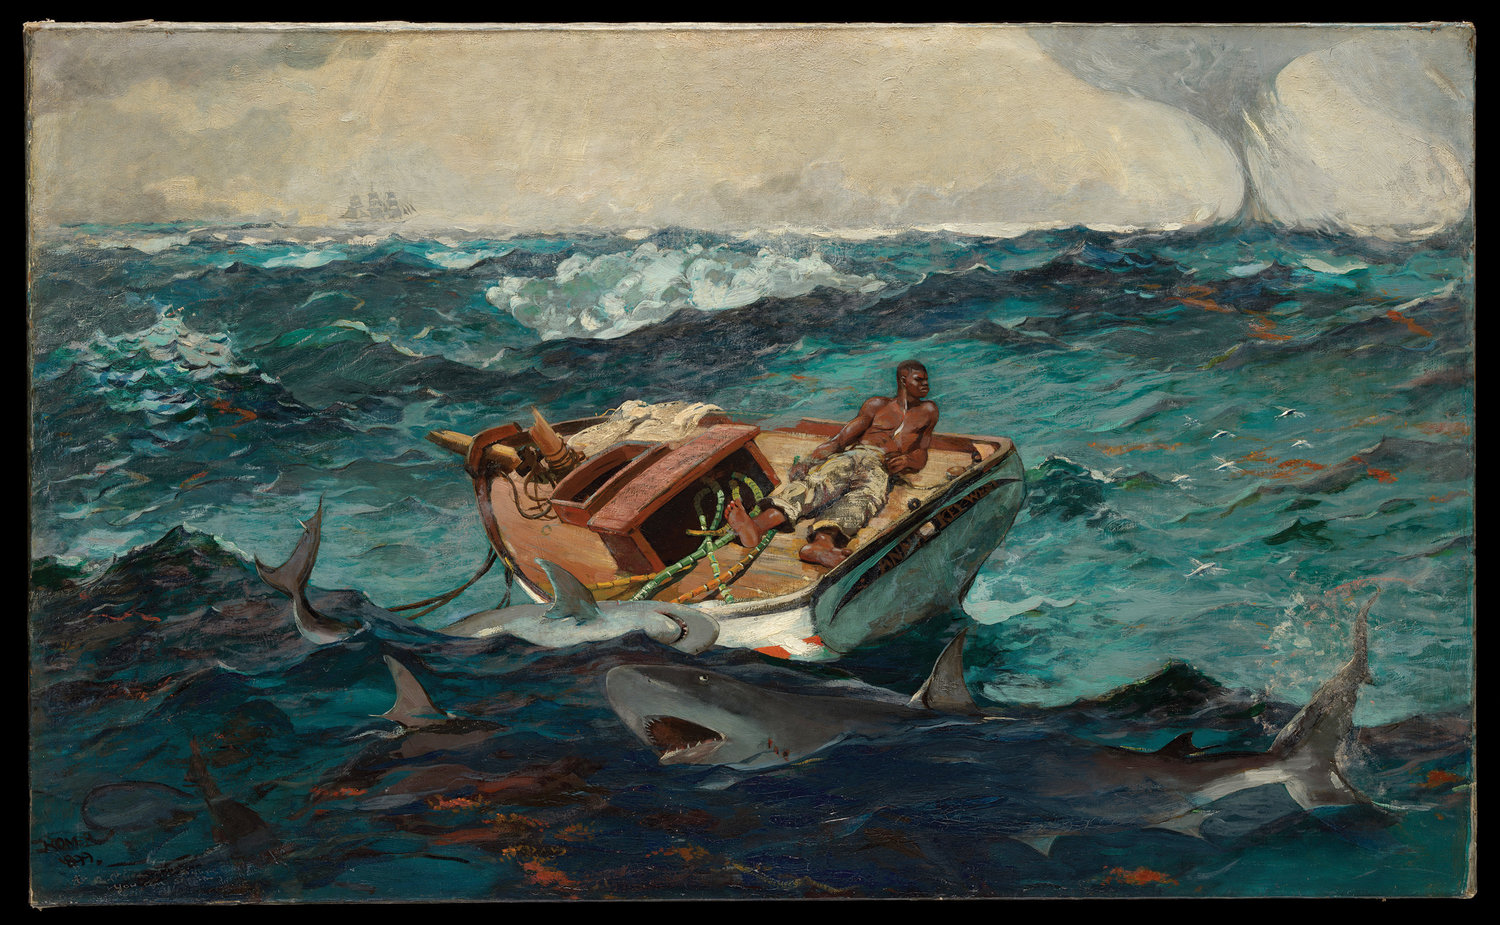 AT SEA—The exhibit, “Winslow Homer: Crosscurrents,” runs through July 31 at the Metropolitan Museum of Art in Manhattan. Winslow Homer (American, 1836– 1910). The Gulf Stream, 1899. Oil on canvas. 28 1/8 x 49 1/8 in. (71.4 x 124.8 cm). The Metropolitan Museum of Art, Catharine Lorillard Wolfe Collection, Wolfe Fund, 1906 (06.1234).